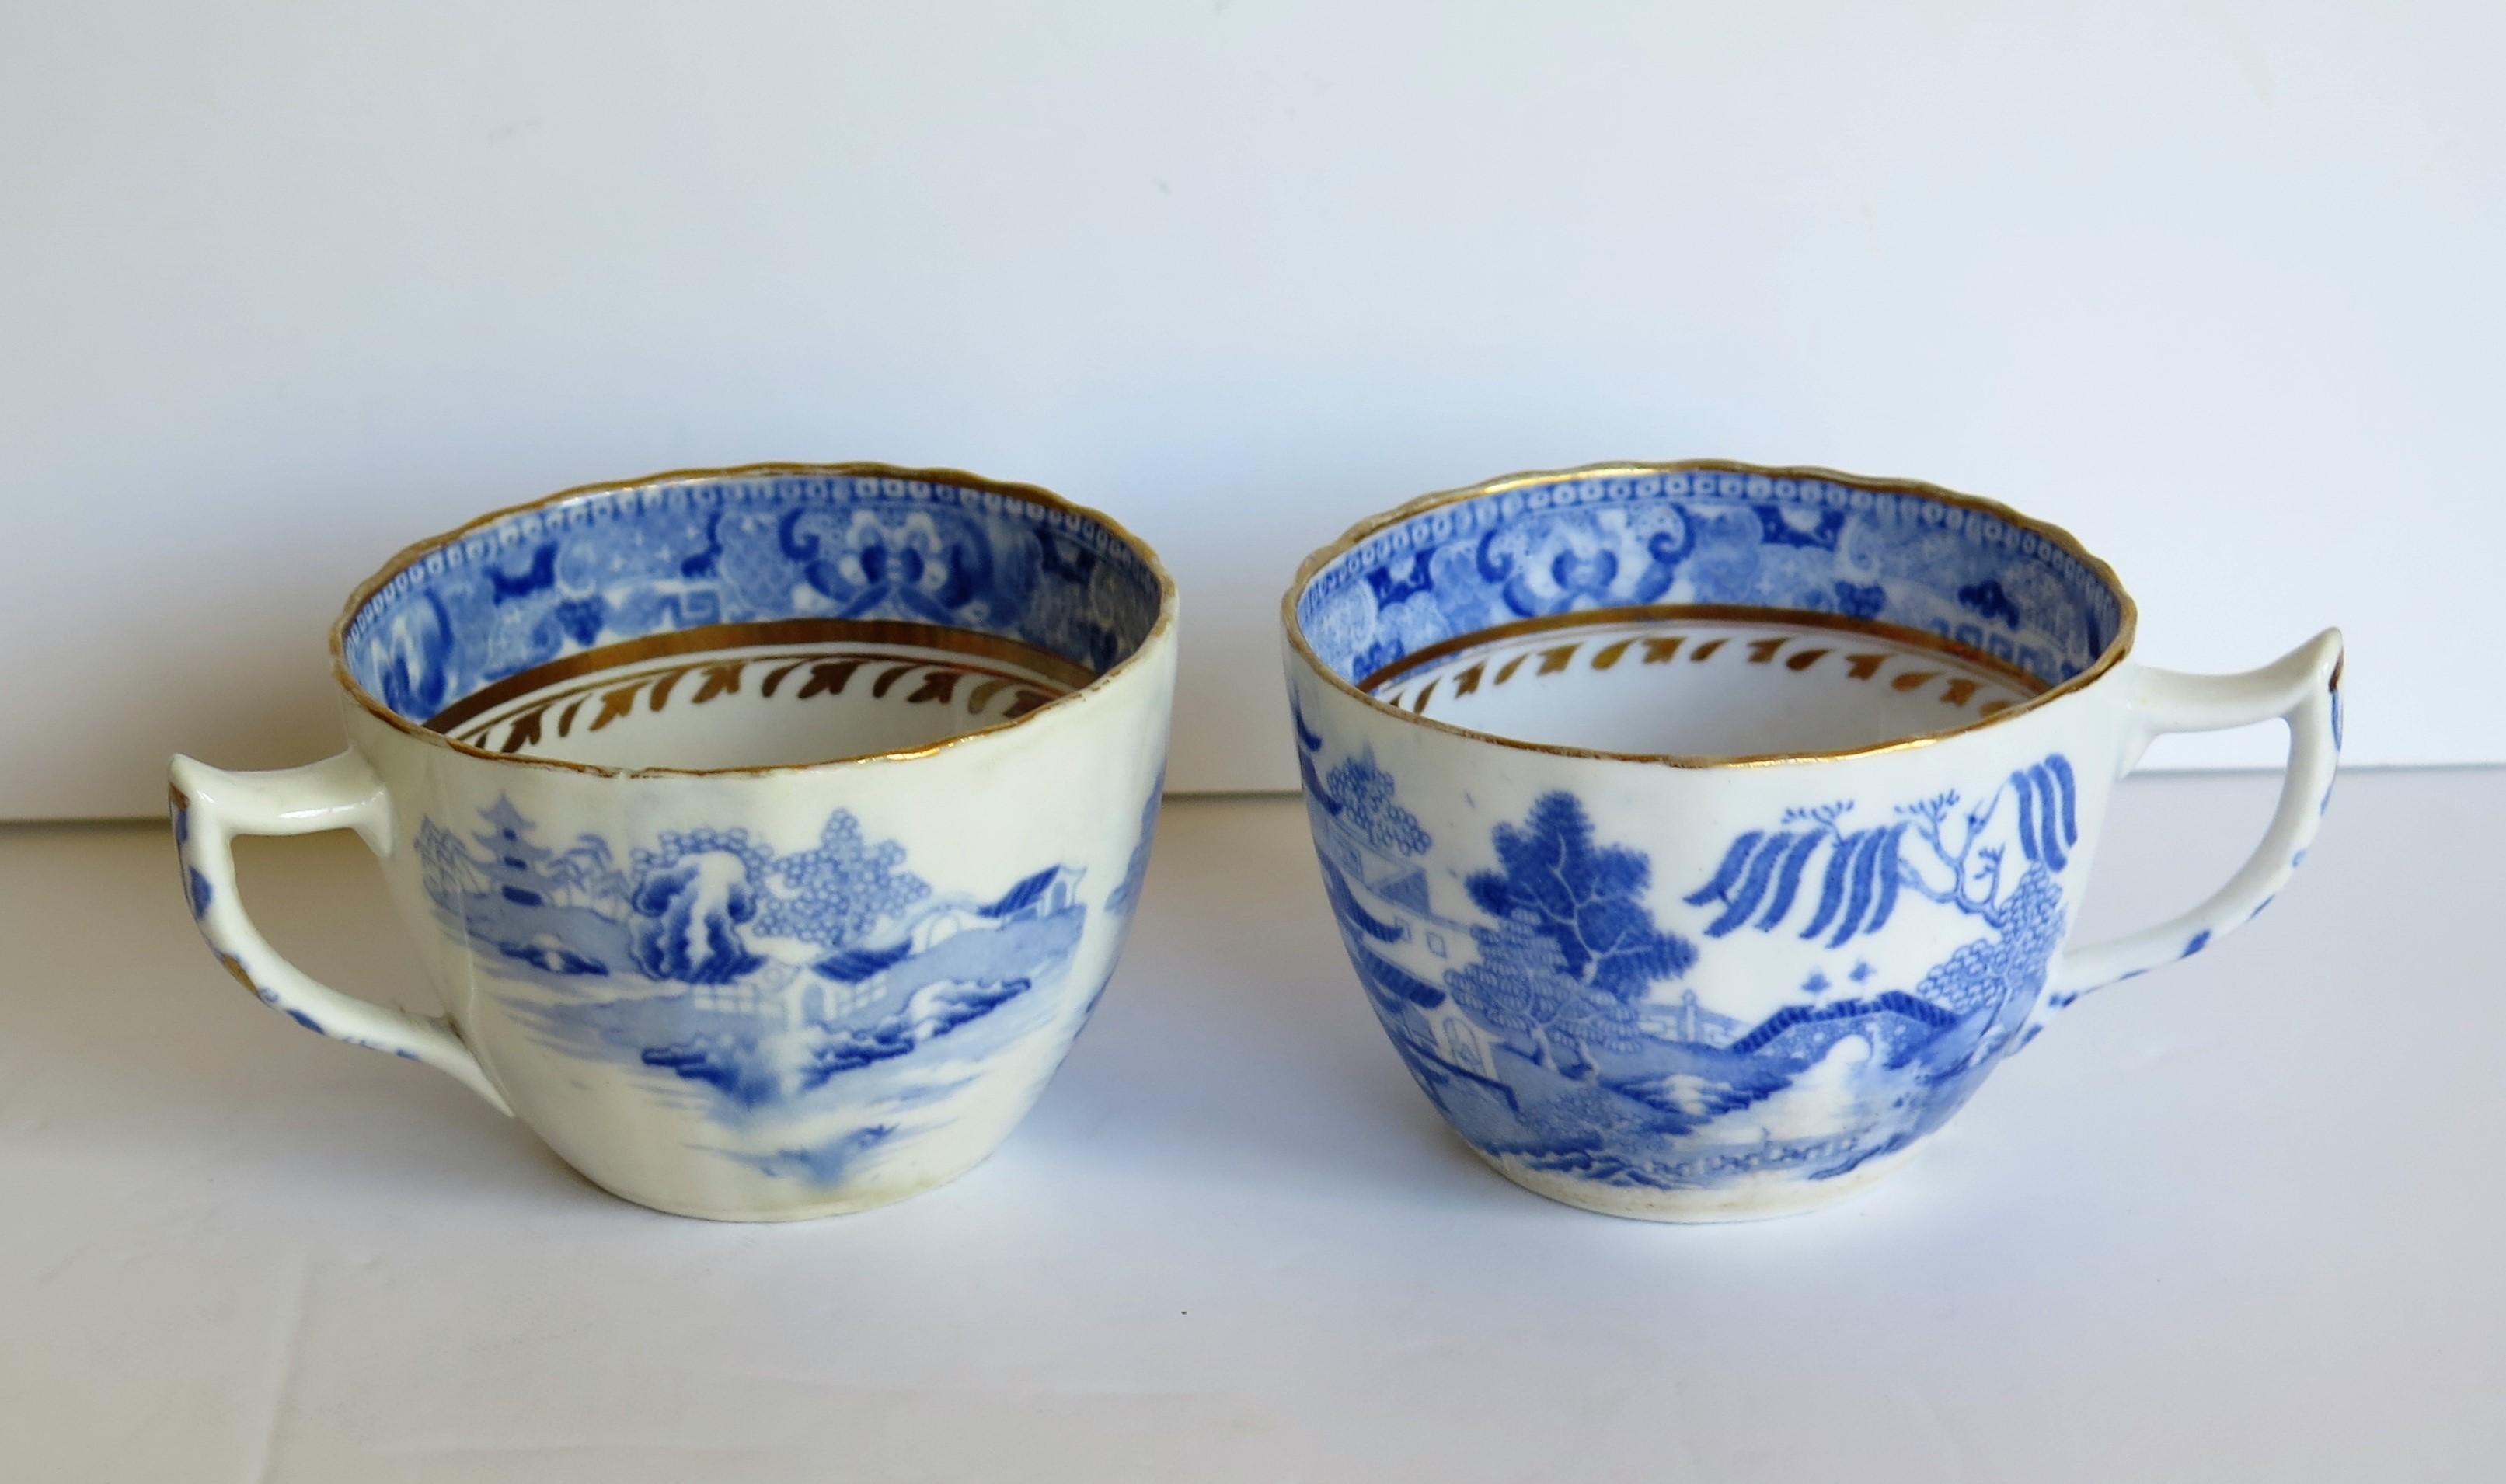 Chinoiserie Miles Mason Porcelain Pair of Tea Cups Broseley Blue and White Pattern, Ca. 1805 For Sale